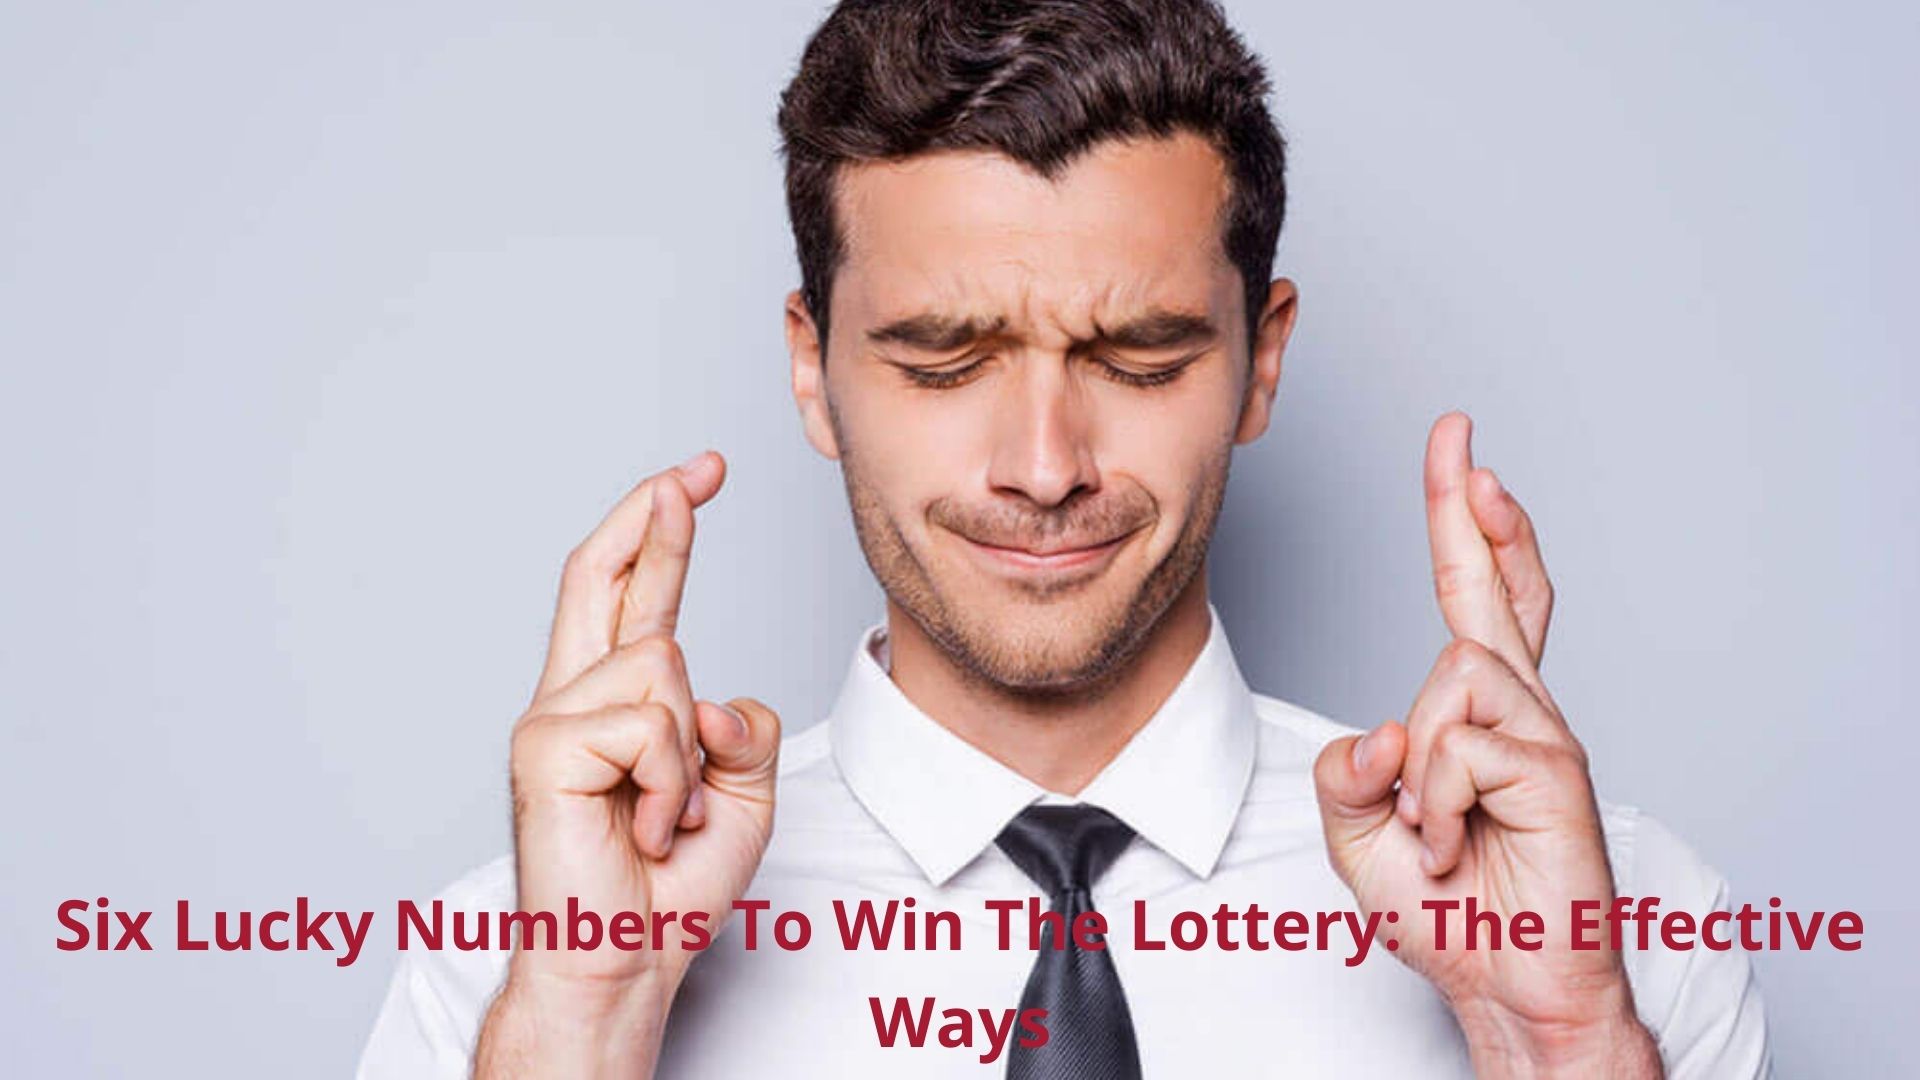 Six Lucky Numbers To Win The Lottery